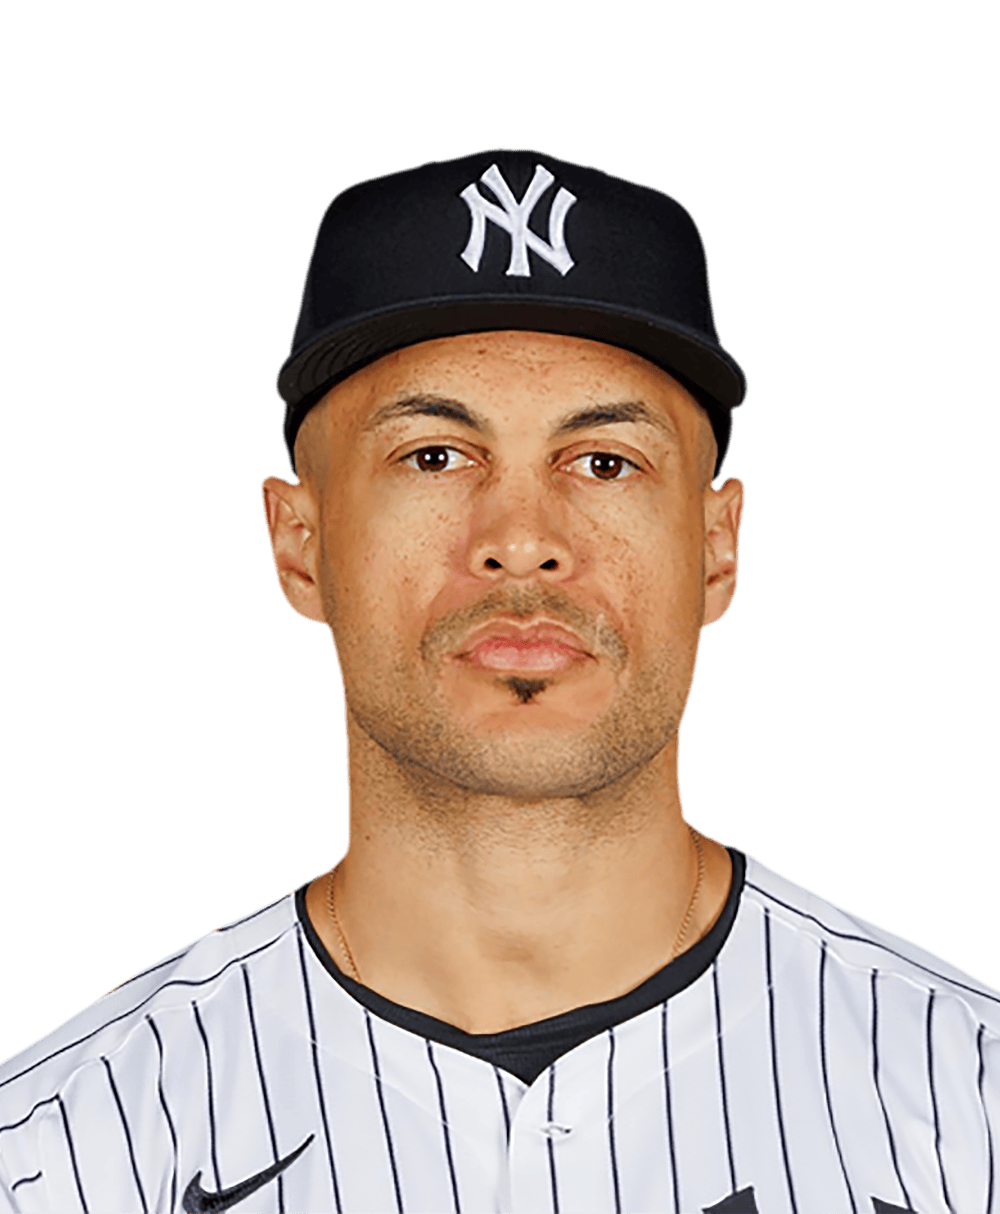 Yankees' roster likely set